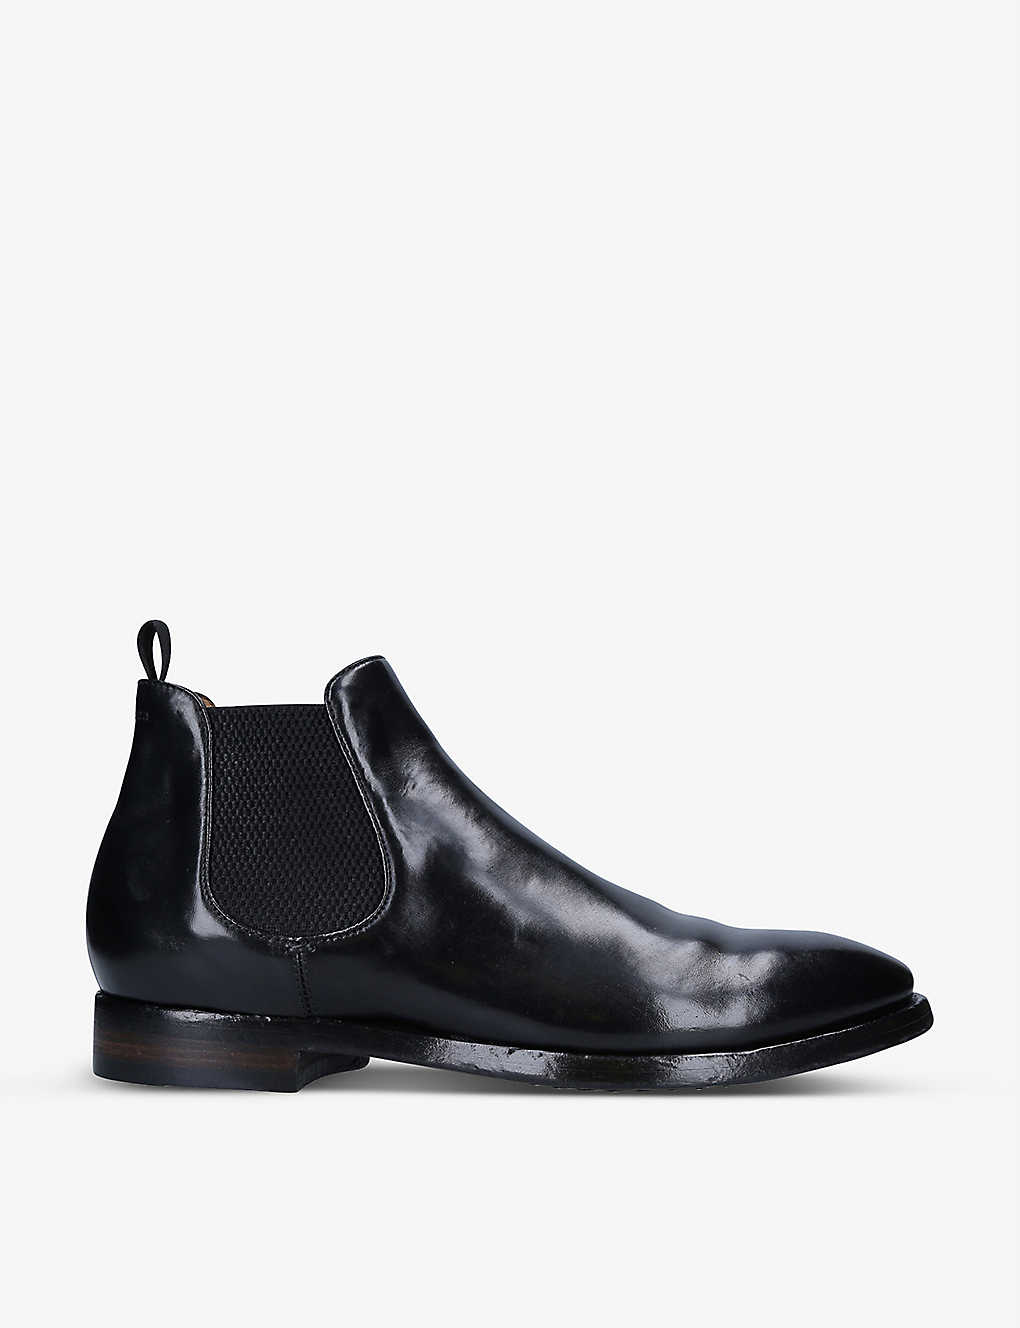 Shop Officine Creative Men's Black Providence Round-toe Leather Chelsea Boots